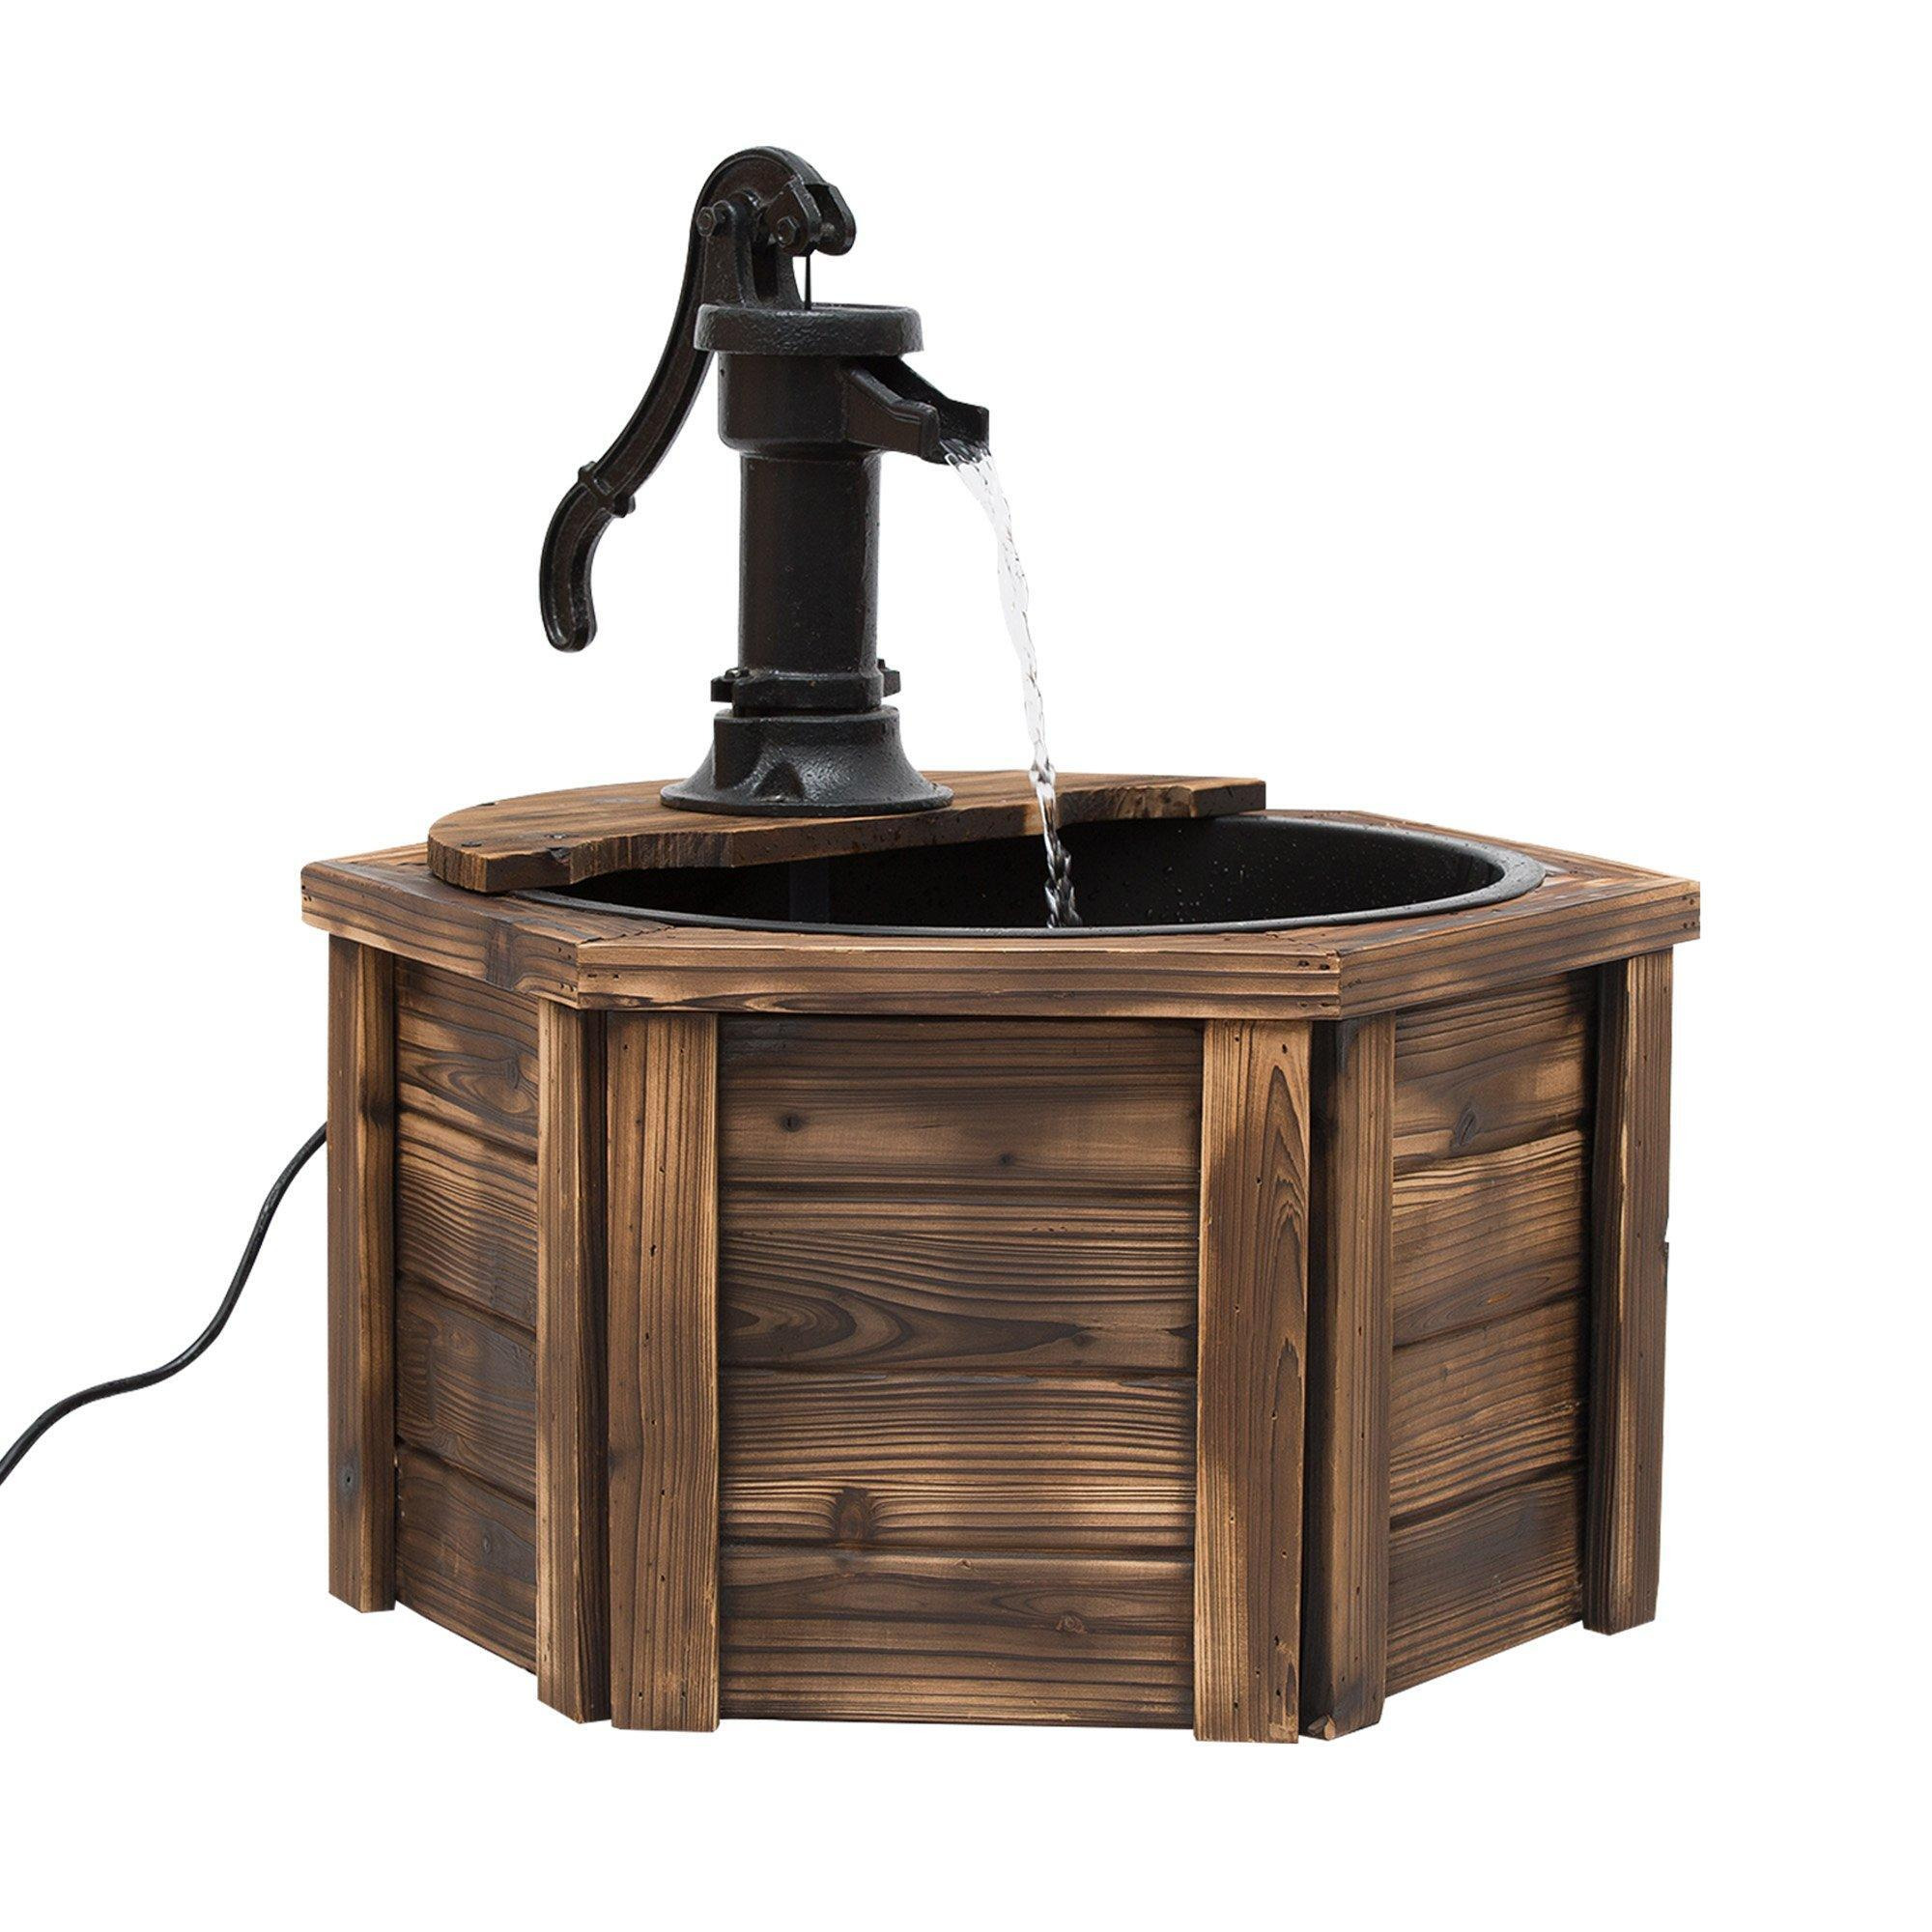 Wooden Electric Water Fountain Garden Ornament with Hand Pump Vintage Style - image 1